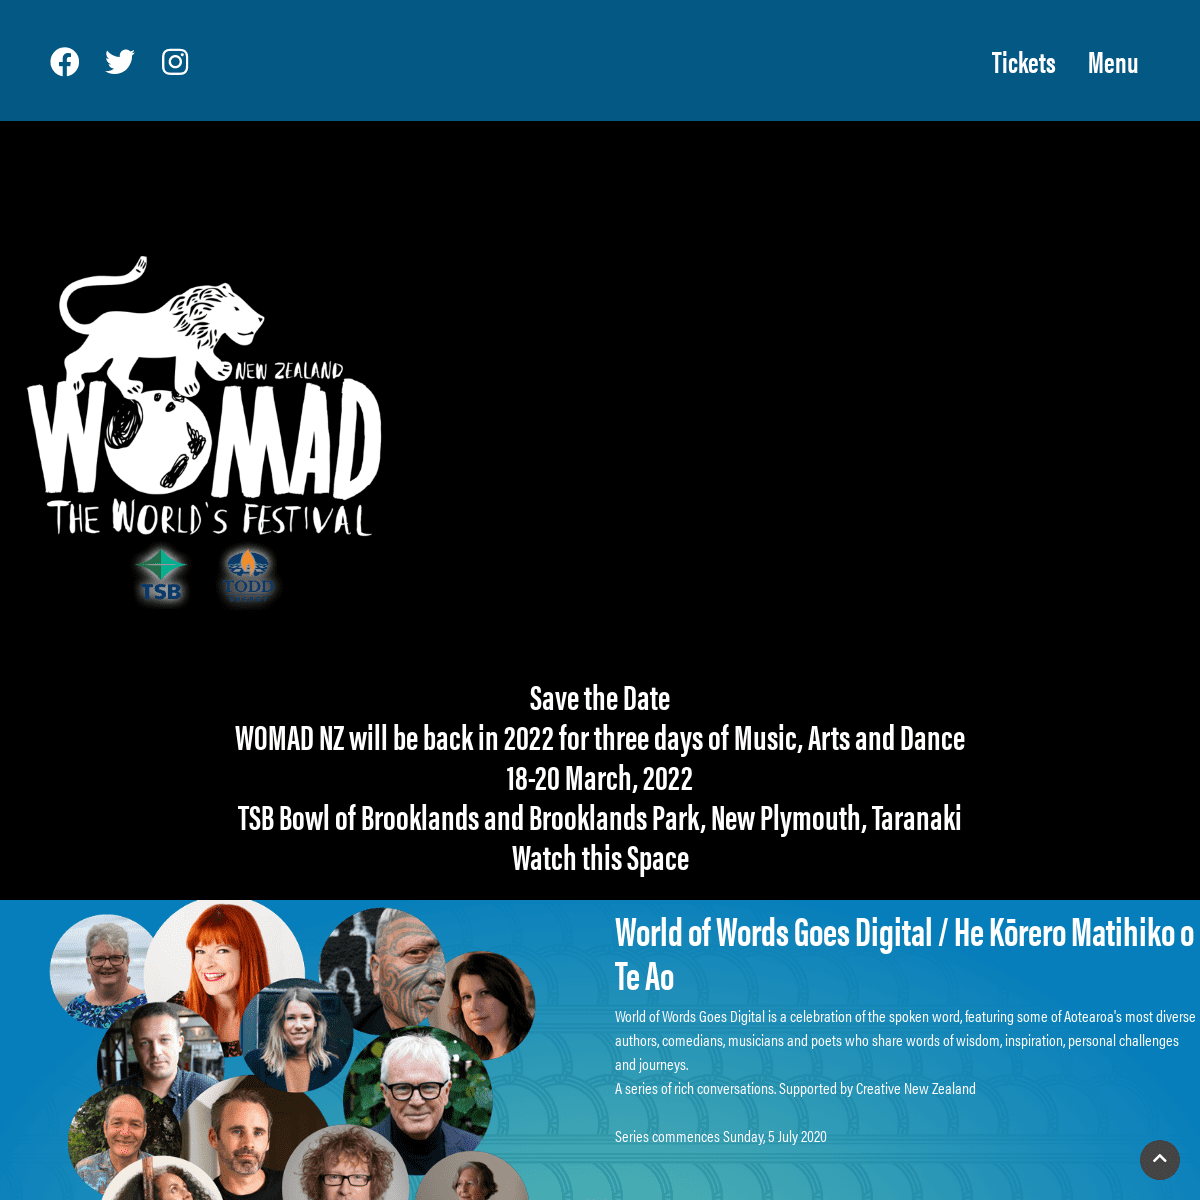 A complete backup of https://womad.co.nz